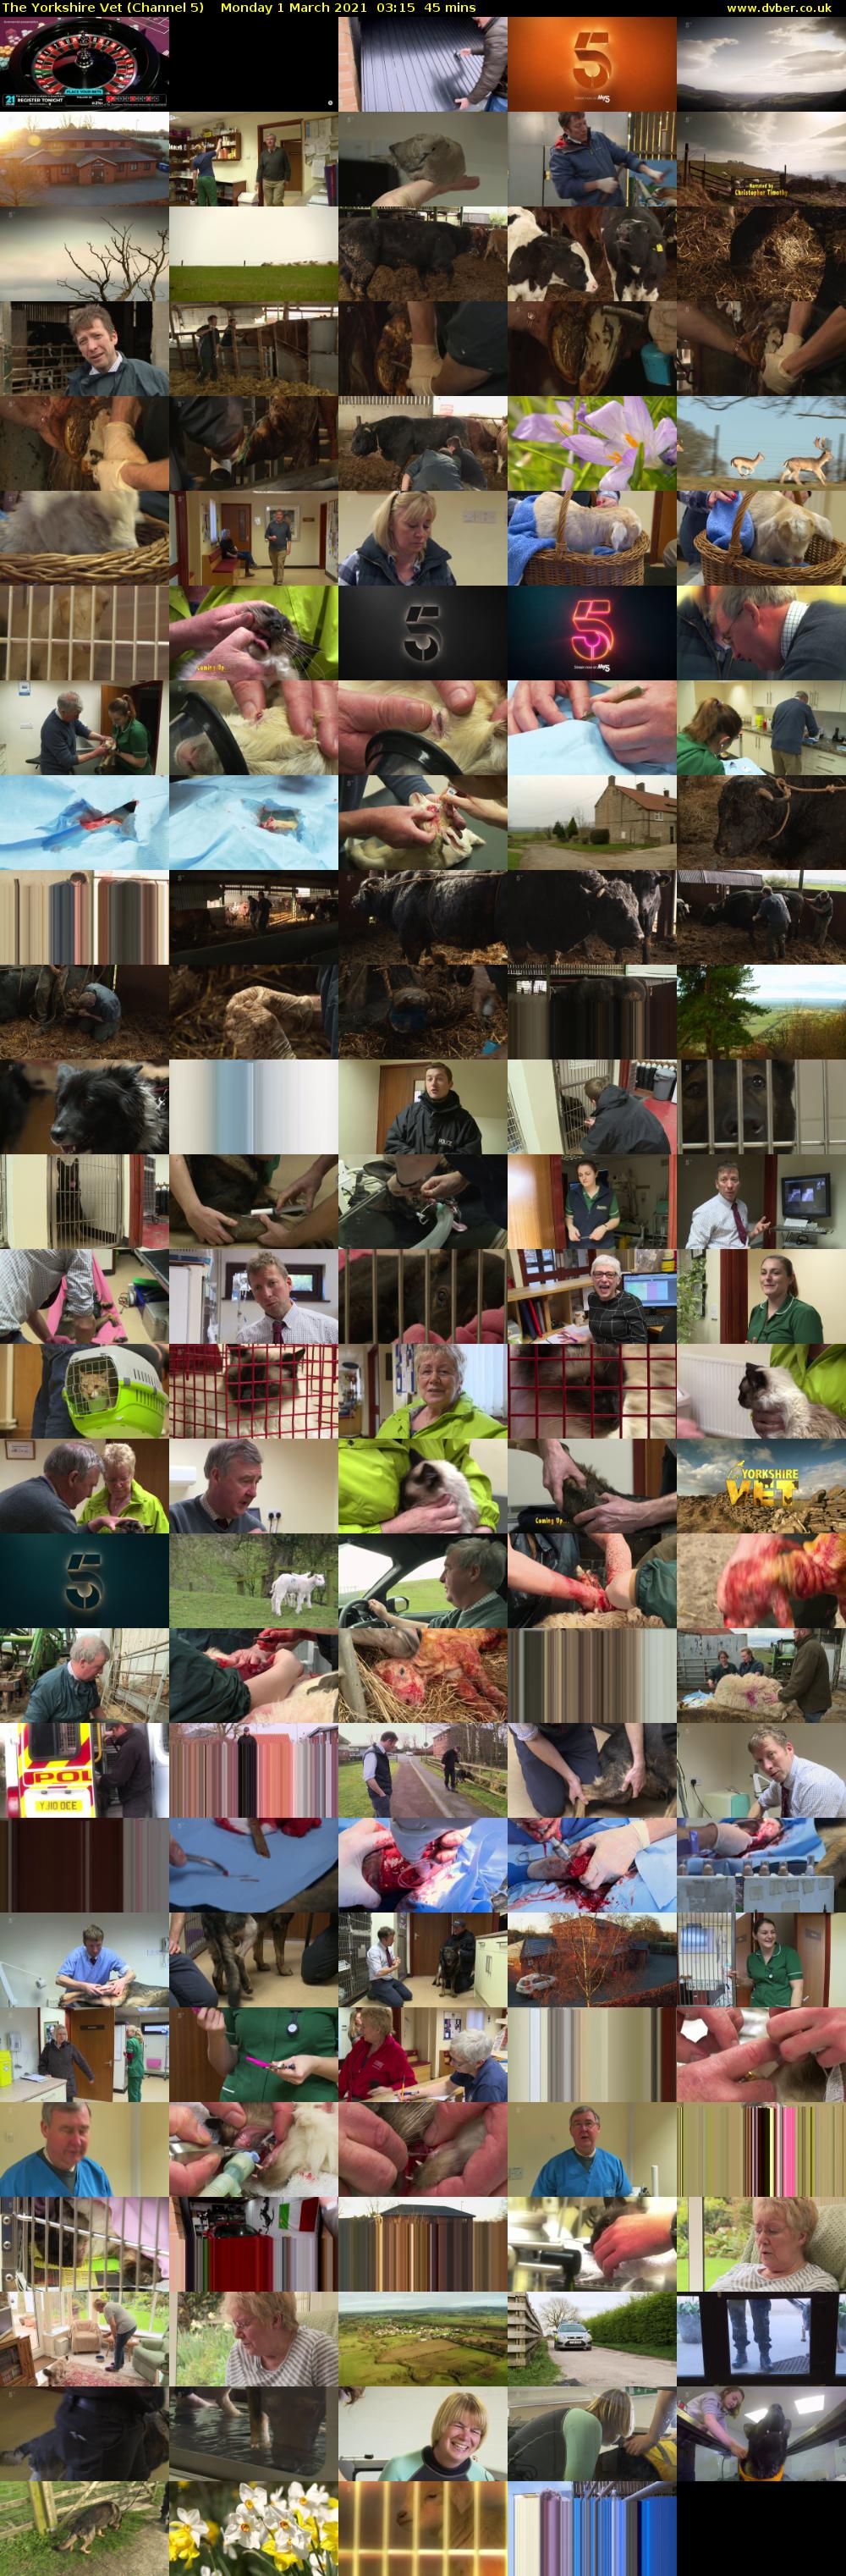 The Yorkshire Vet (Channel 5) Monday 1 March 2021 03:15 - 04:00